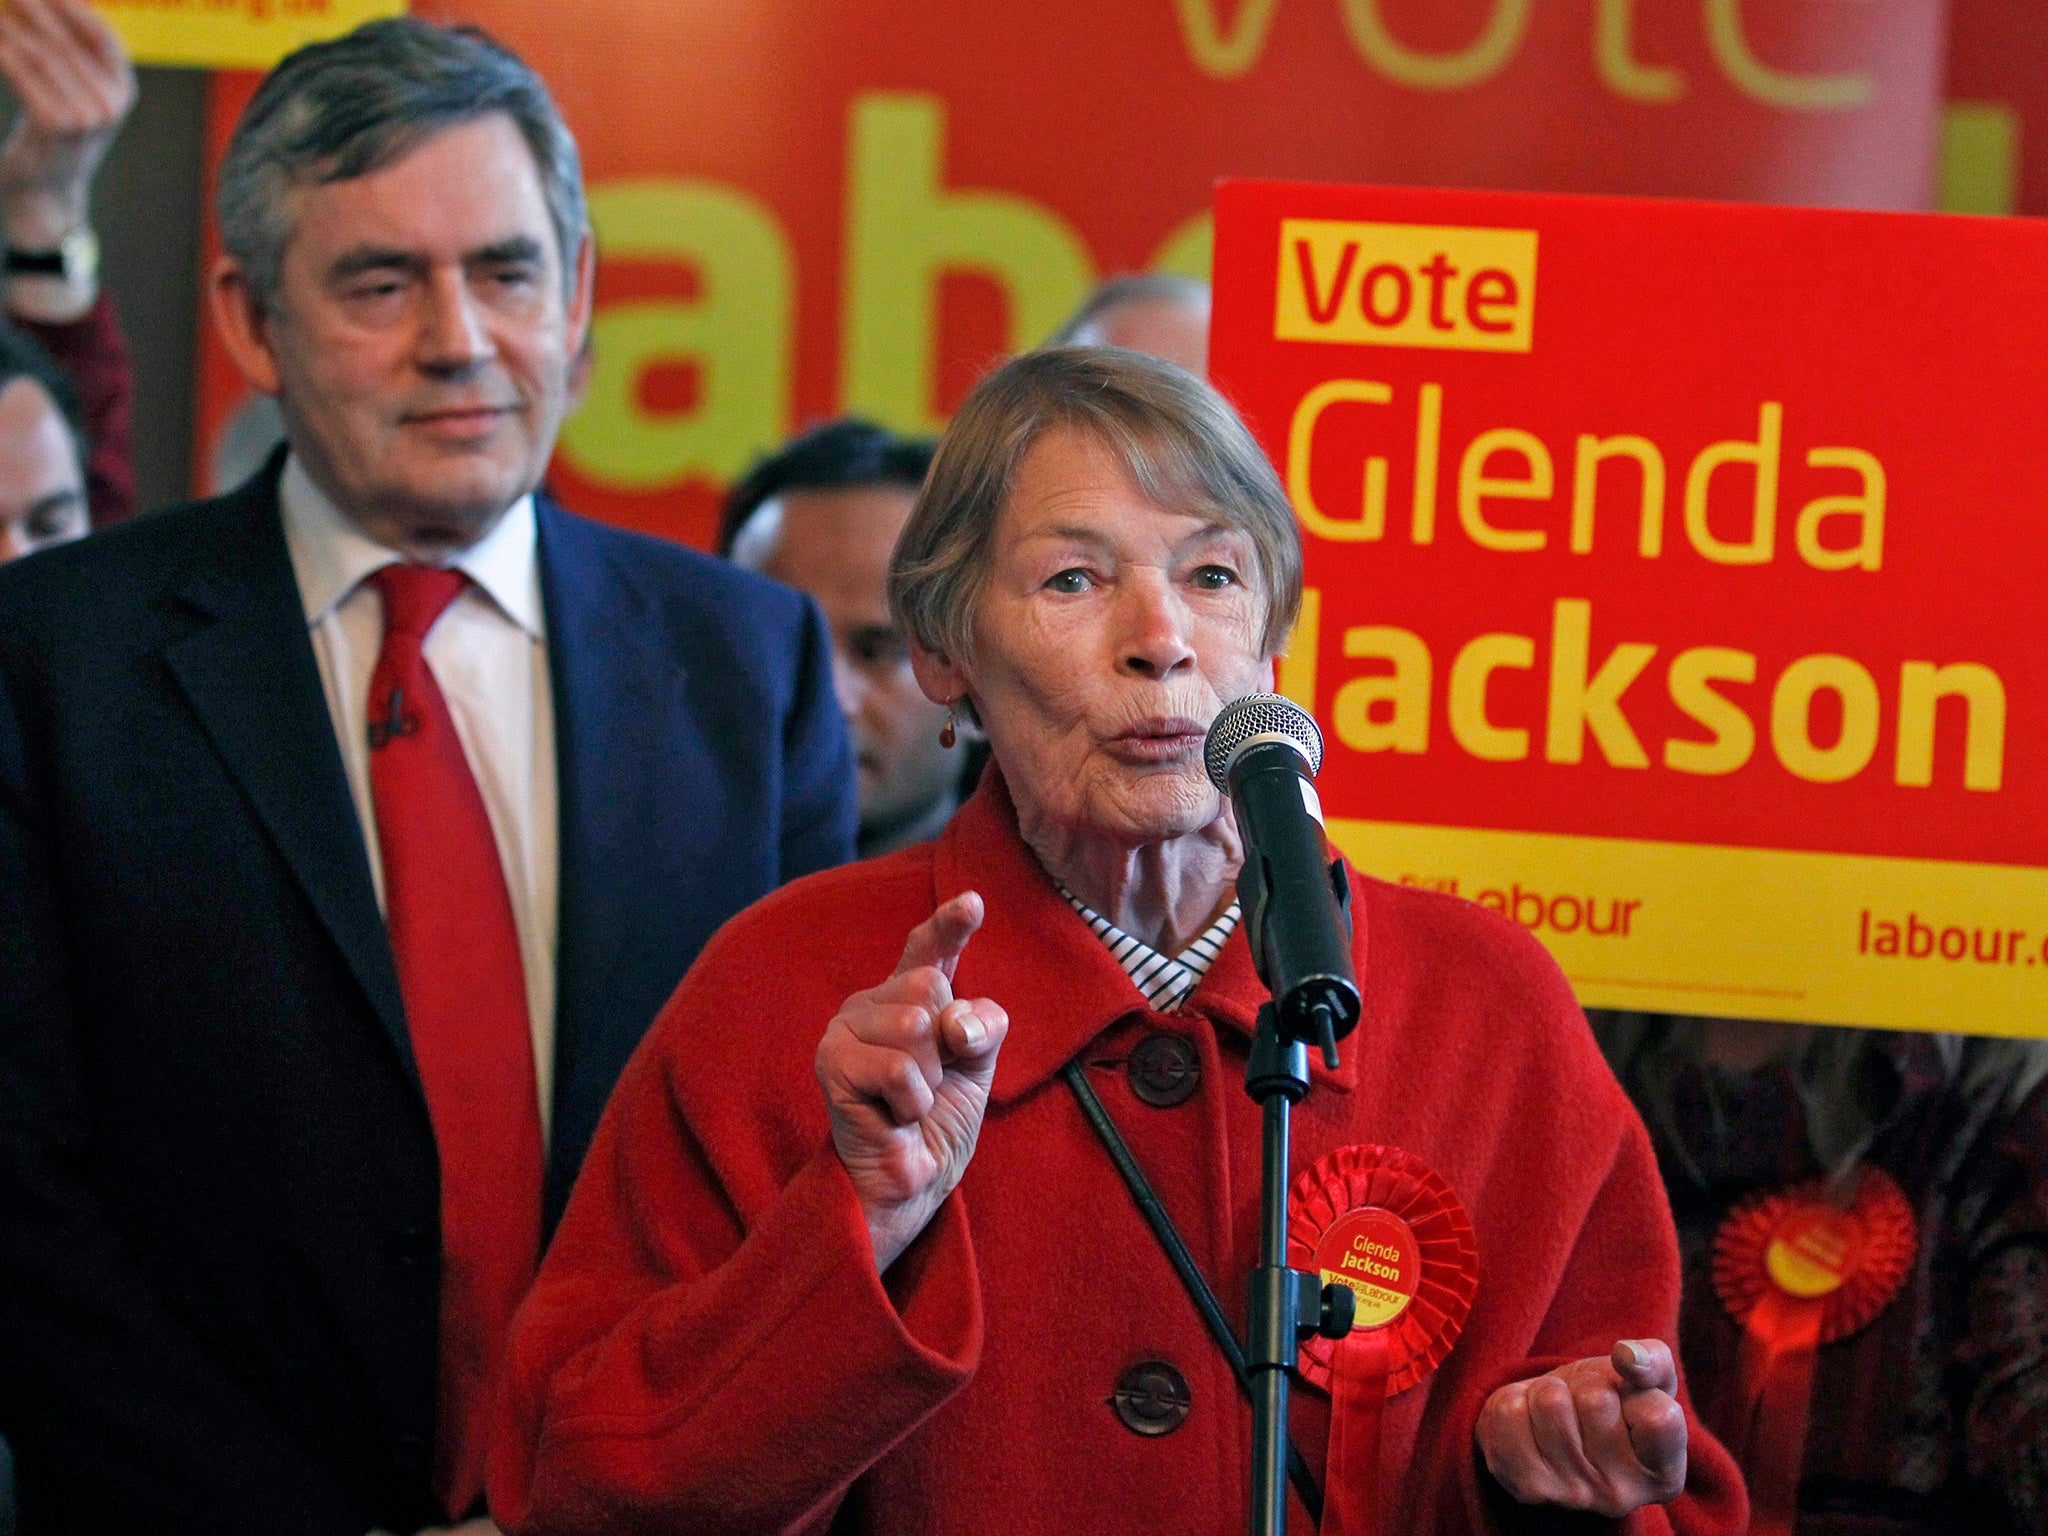 Jackson with then-Prime Minister Gordon Brown at a Labour Party meeting in Kilburn, north London, in 2010